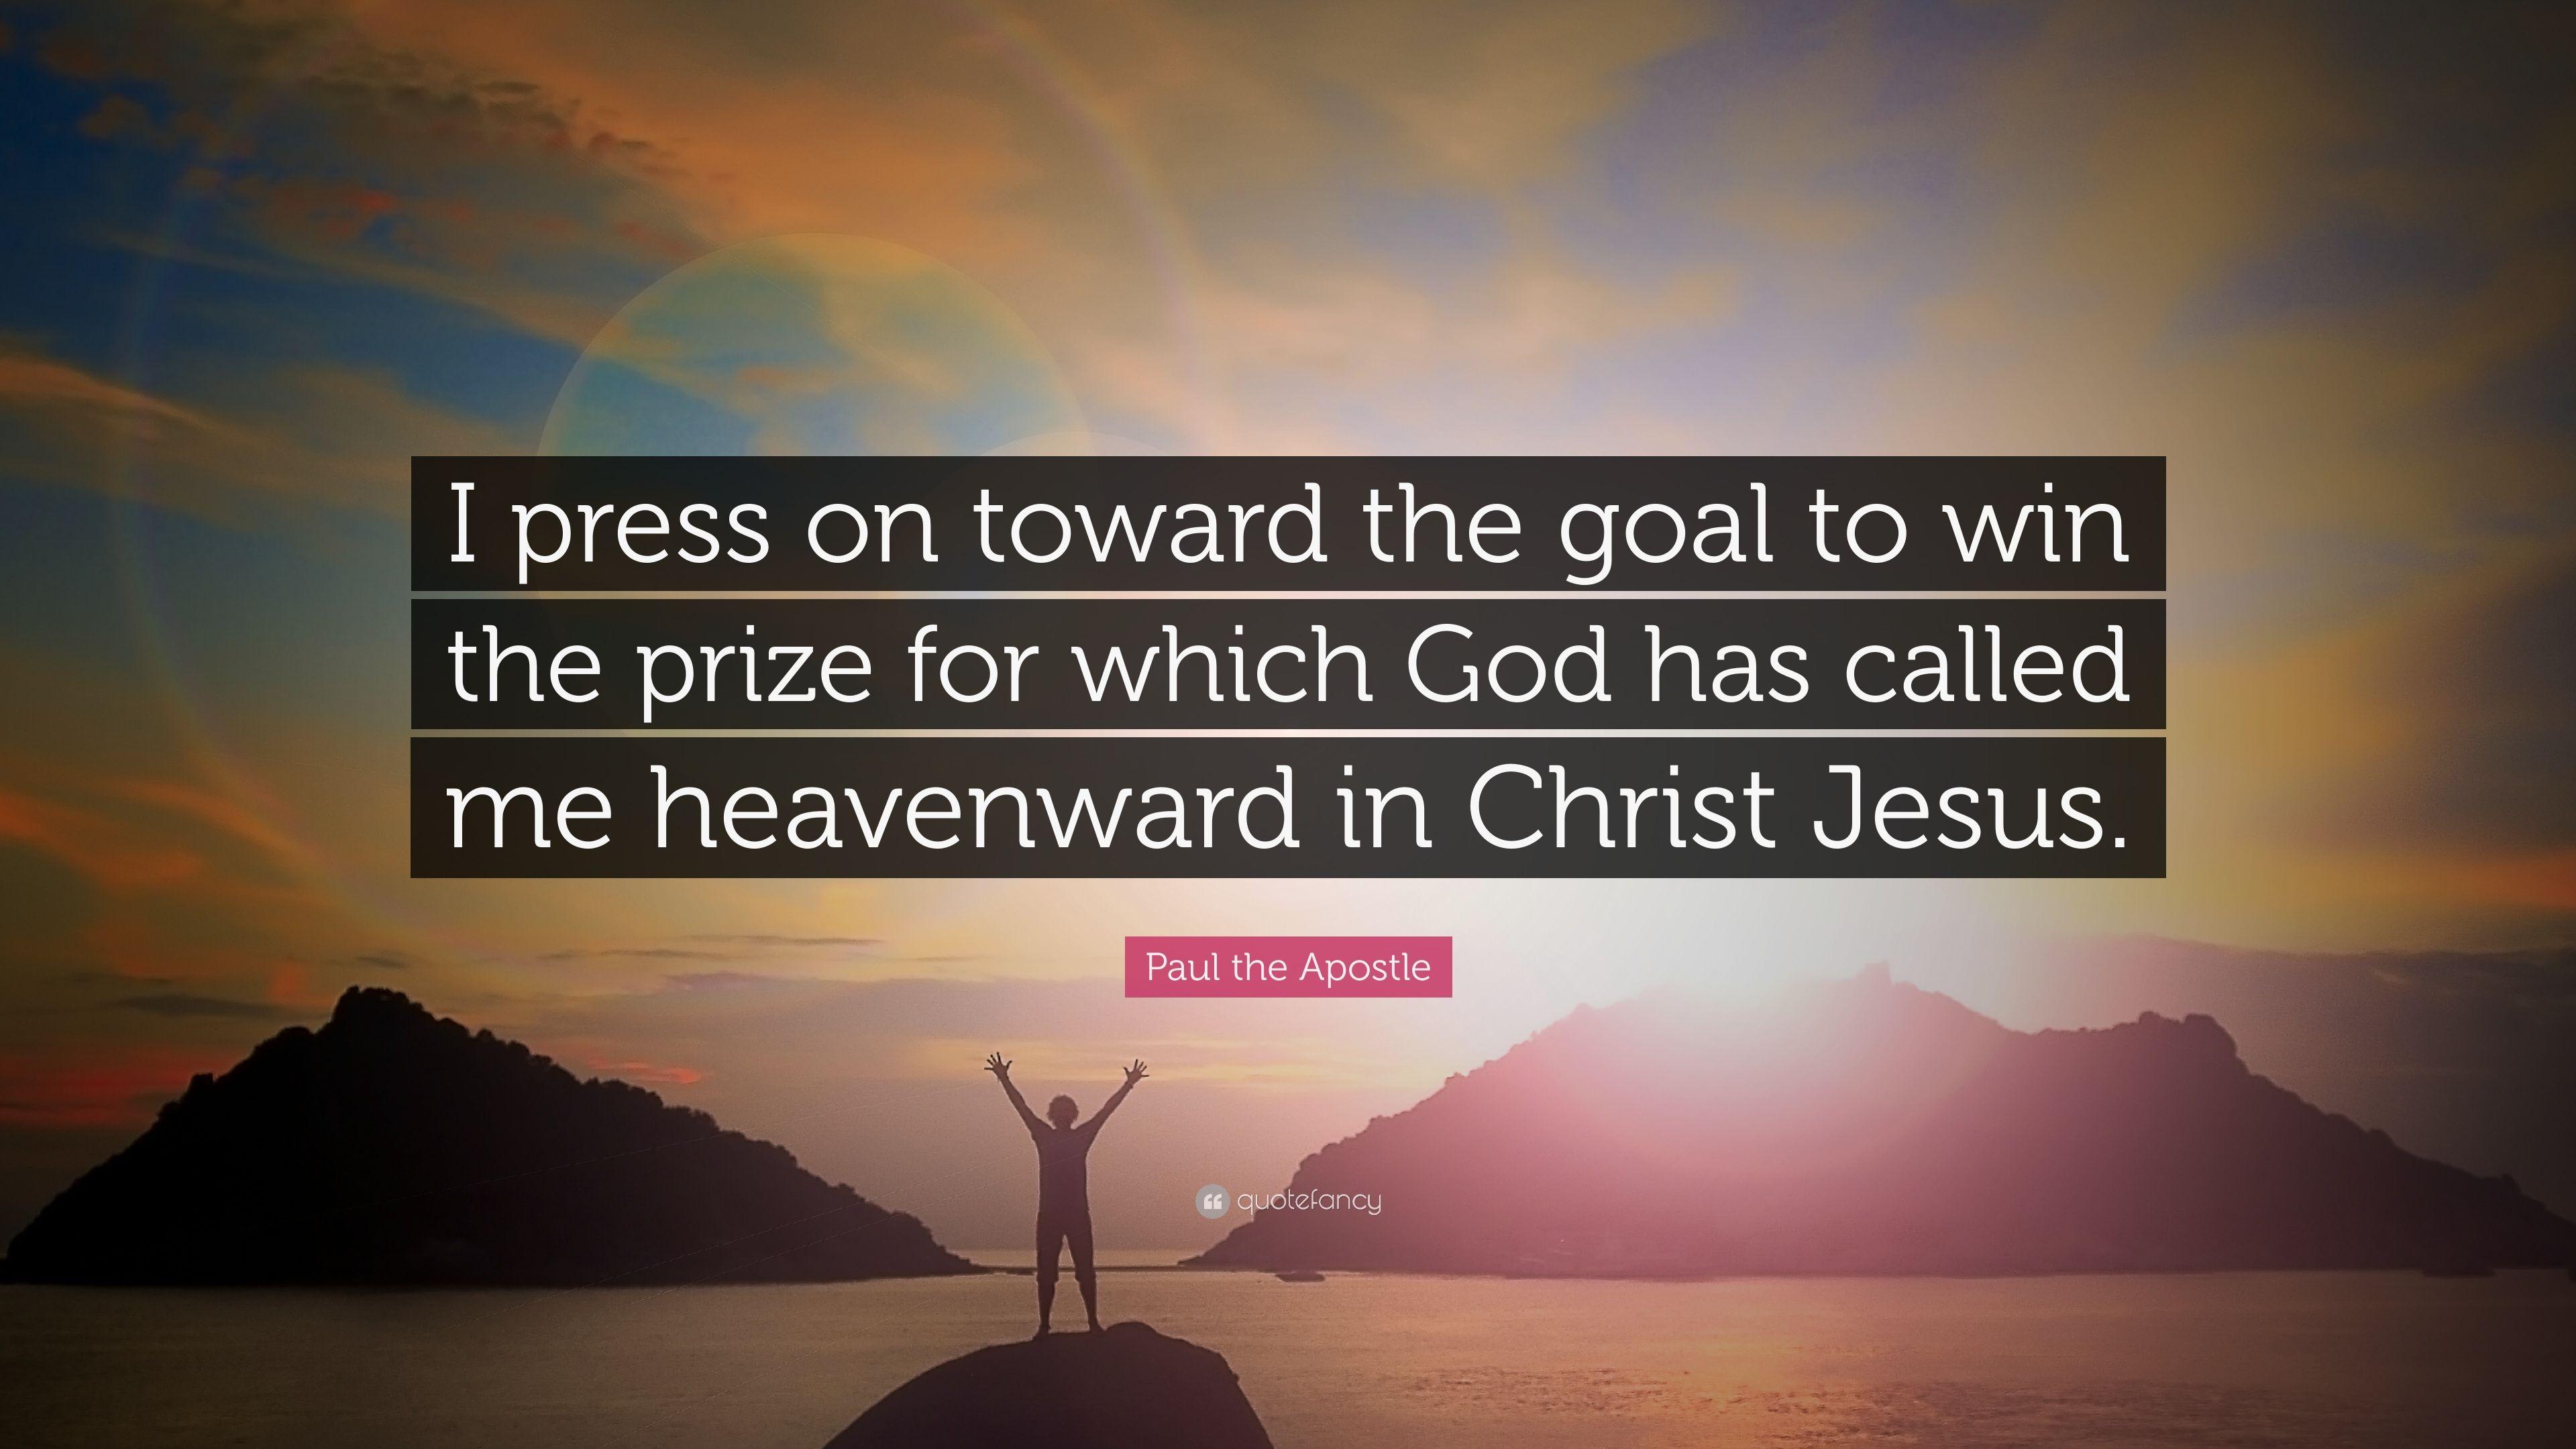 Paul the Apostle Quote: “I press on toward the goal to win